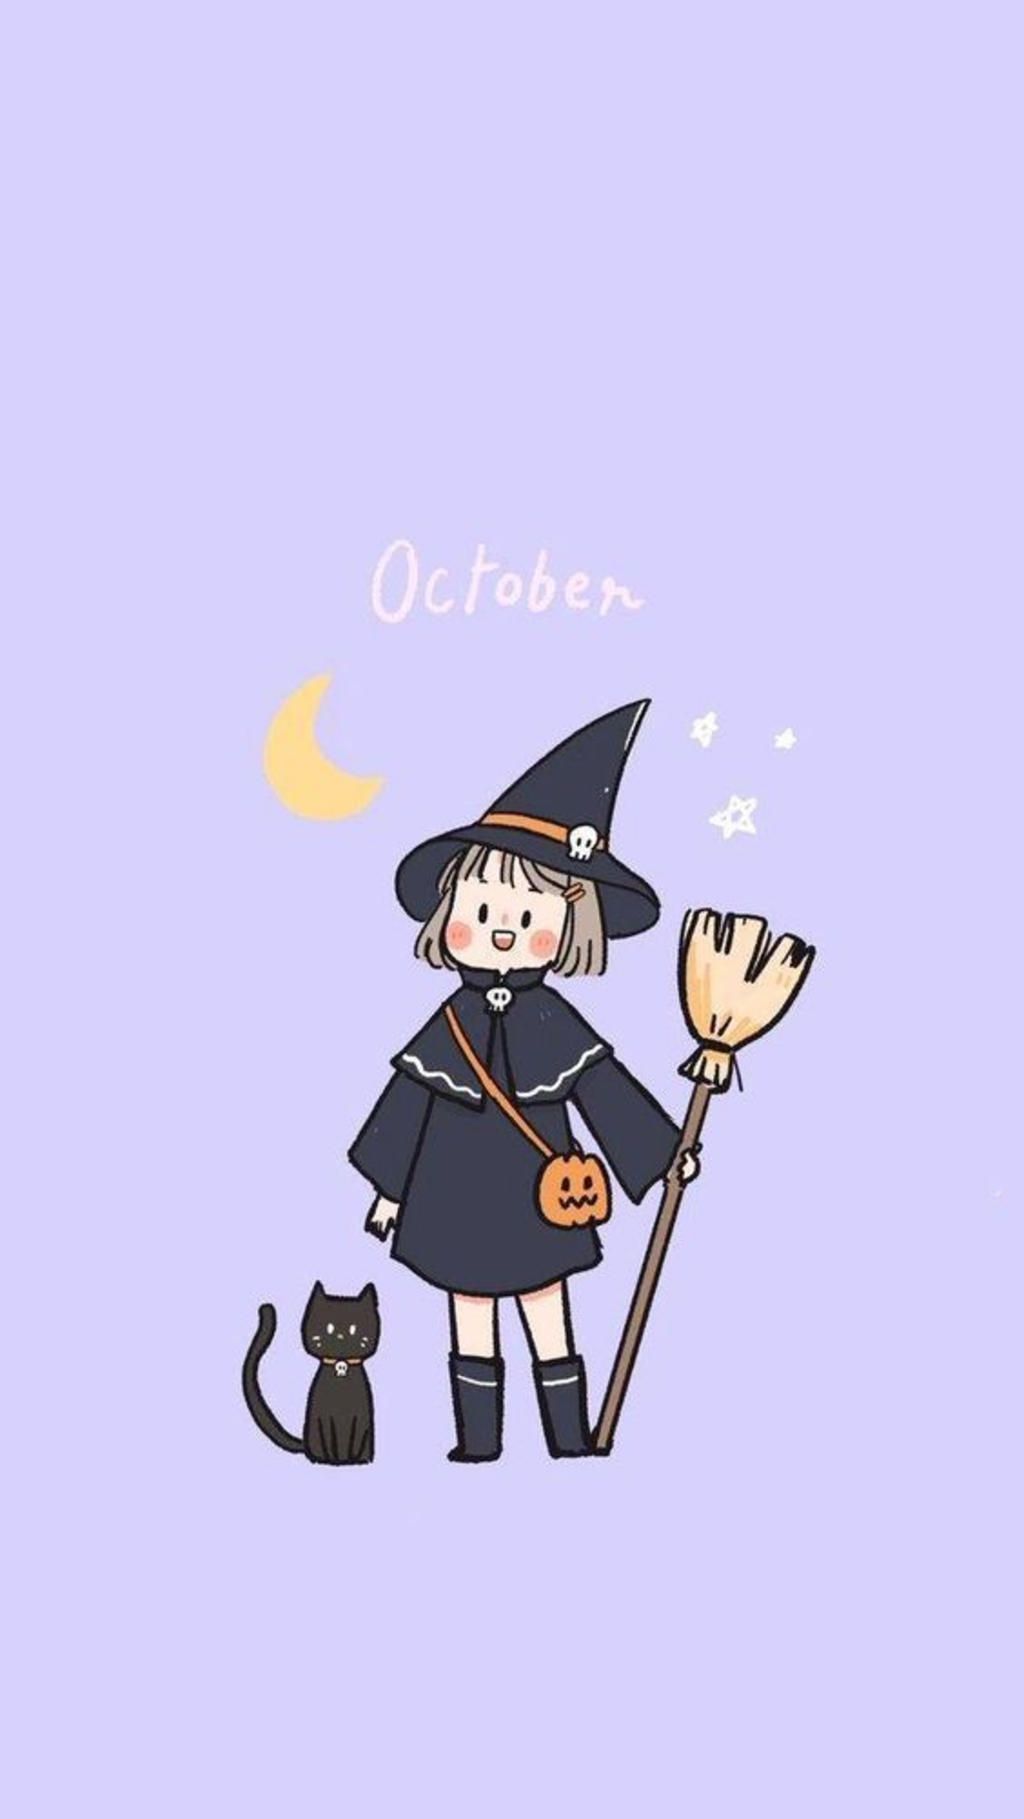 Get inspired by these cute halloween chibis for your next design